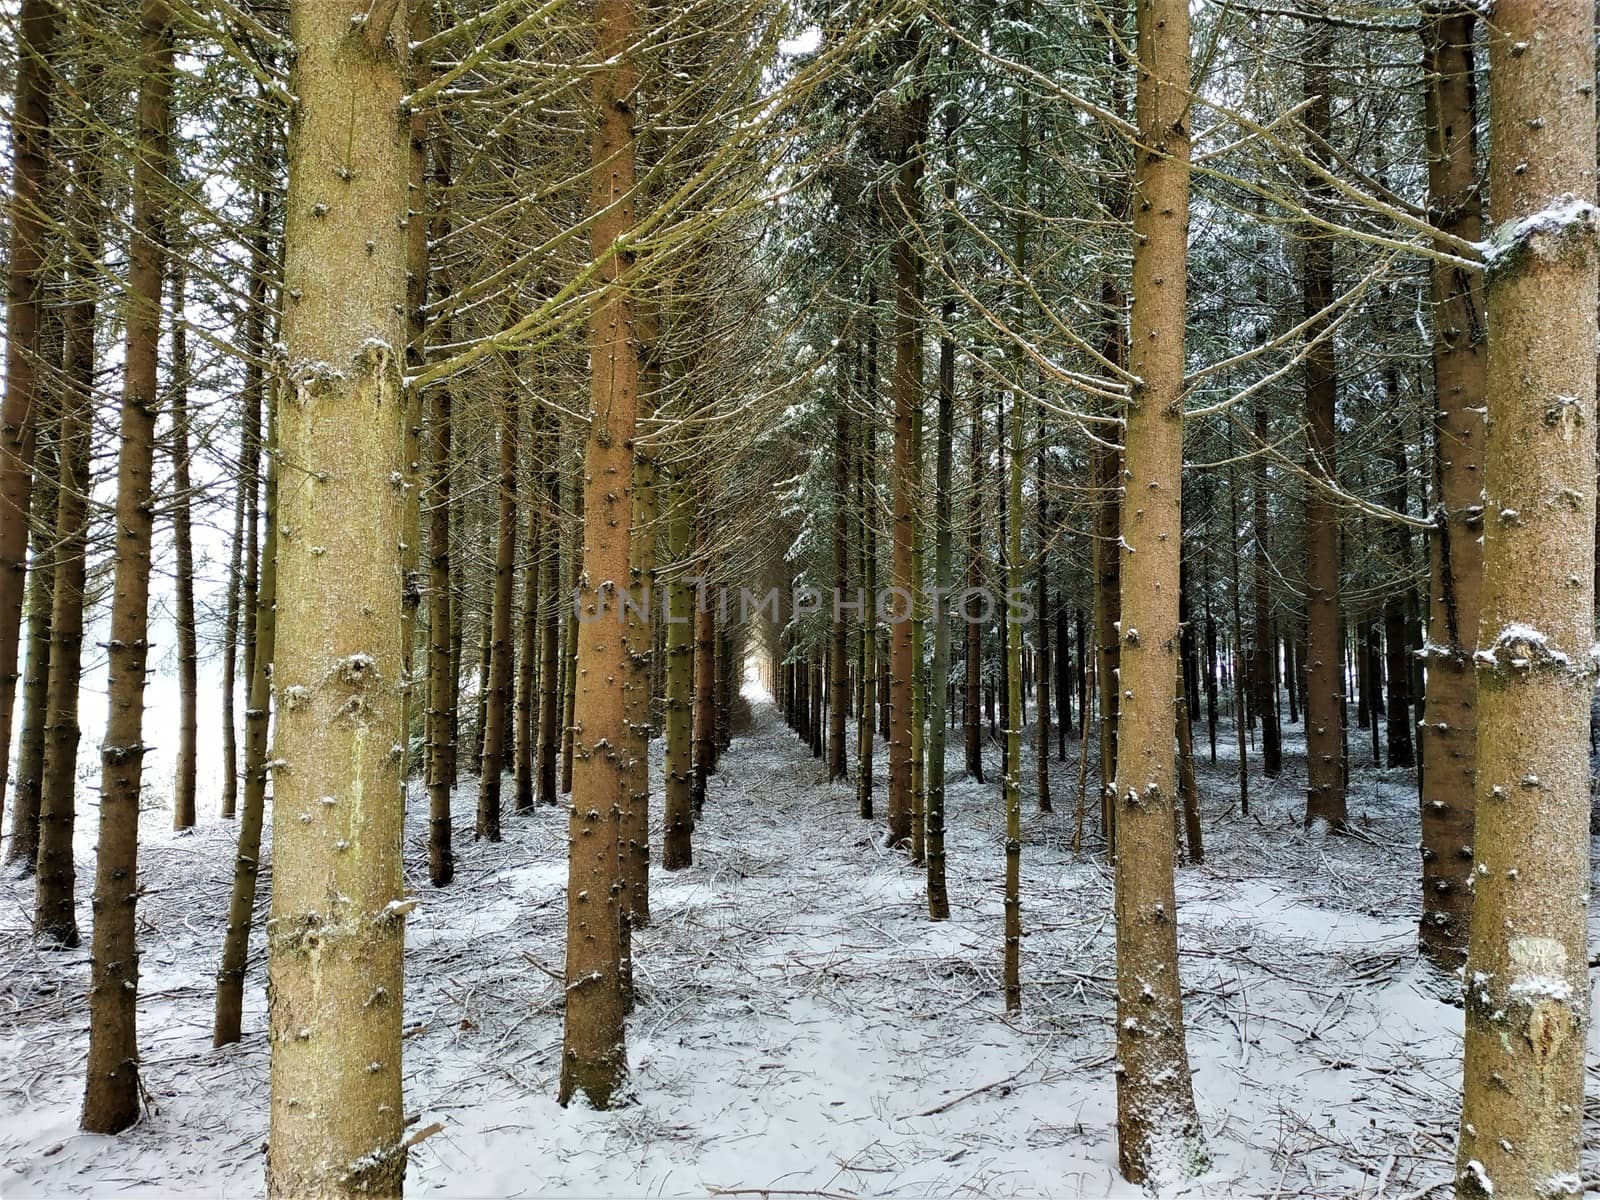 Snowy forest in the winter near Rottweil, Germany